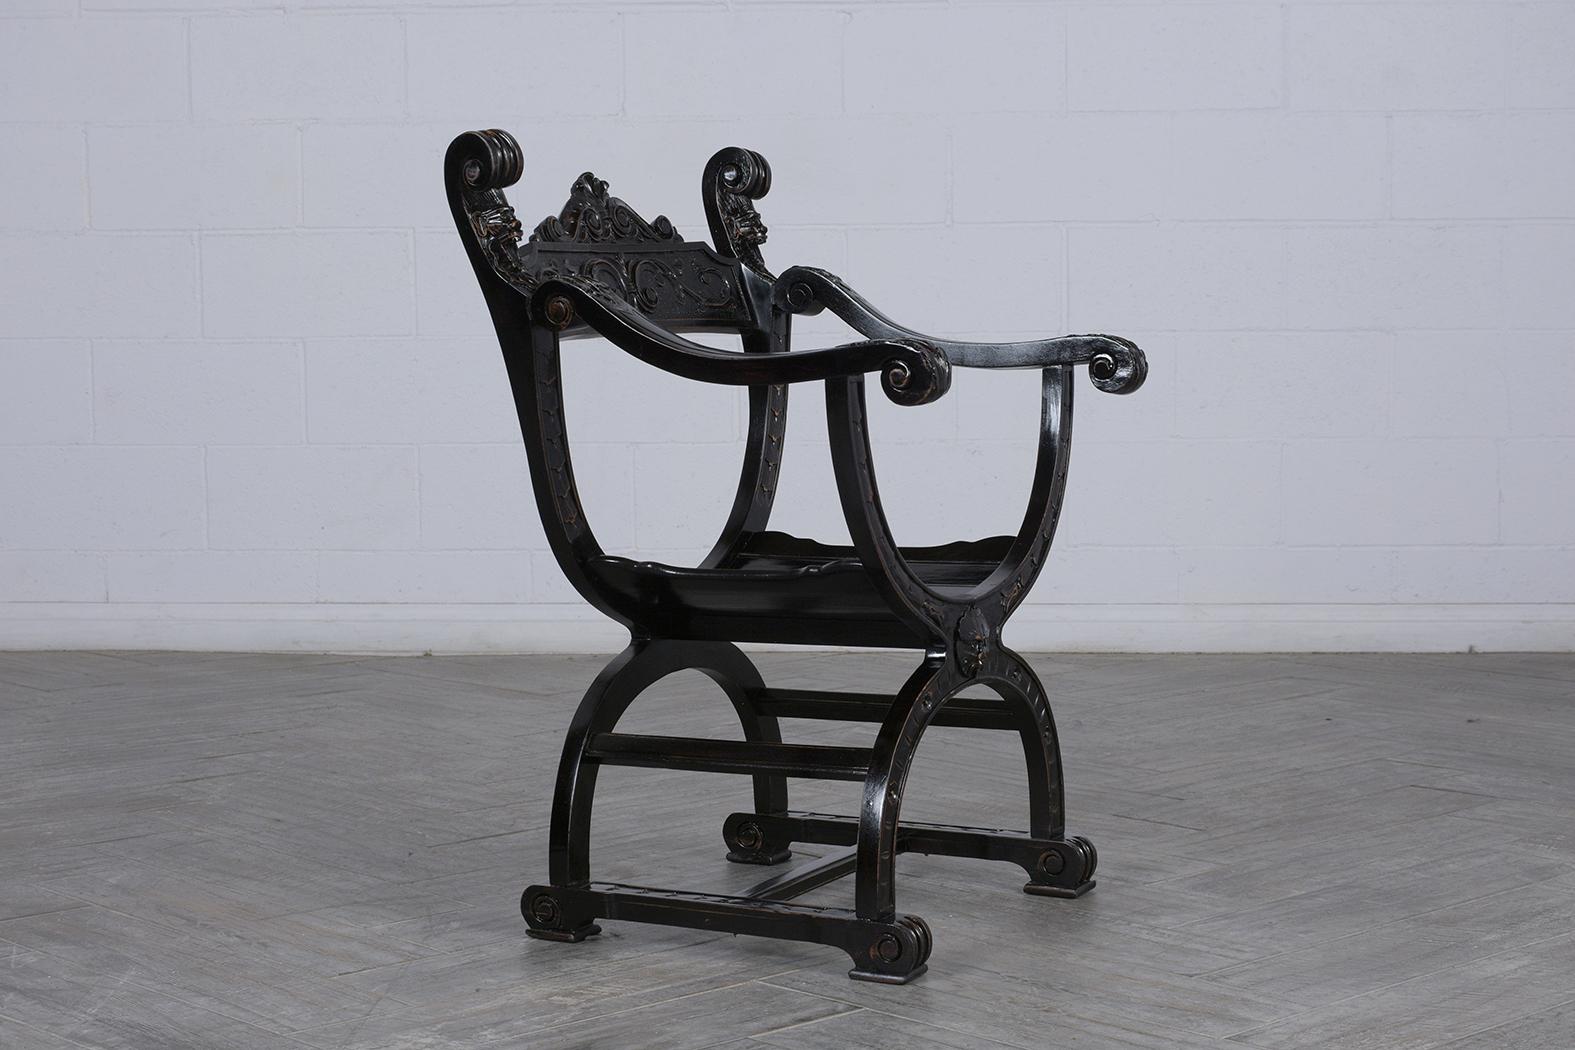 This pair of antique Italian Savonarola style chairs is made of walnut wood with an ebonized finish. There is extensive hand carved details on the backrest, armrest, and front of the base. These chairs are solid, sturdy, and are ready to be used and